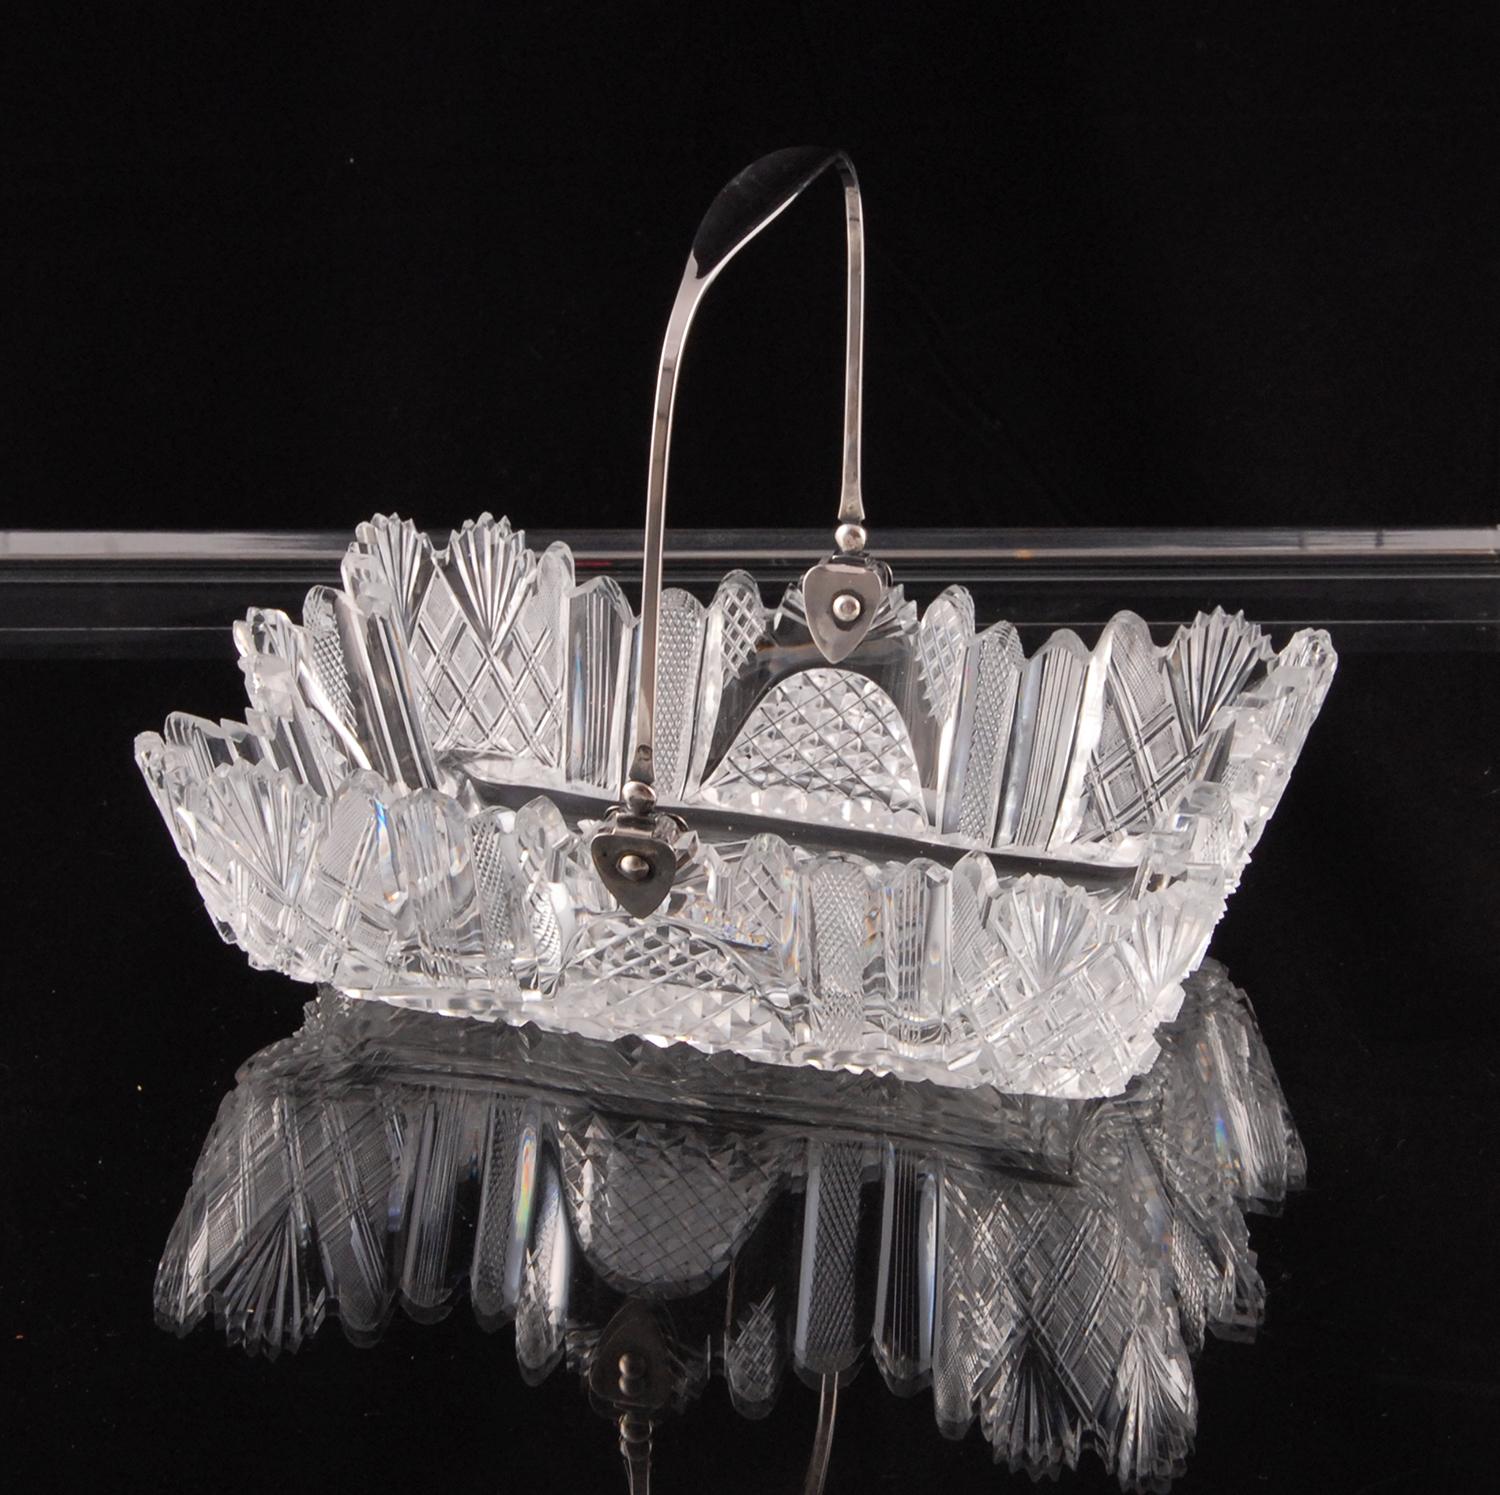 ntique large crystal bread basket with silver handle

Made of Regency cut crystal
The handle is made & marked jean Francois Warnots
Origin Flanders 1832 - 1838
Condition good

Width 10in. - 25.5cm
Height 7.5in. - 19cm
Depth 6.7in -